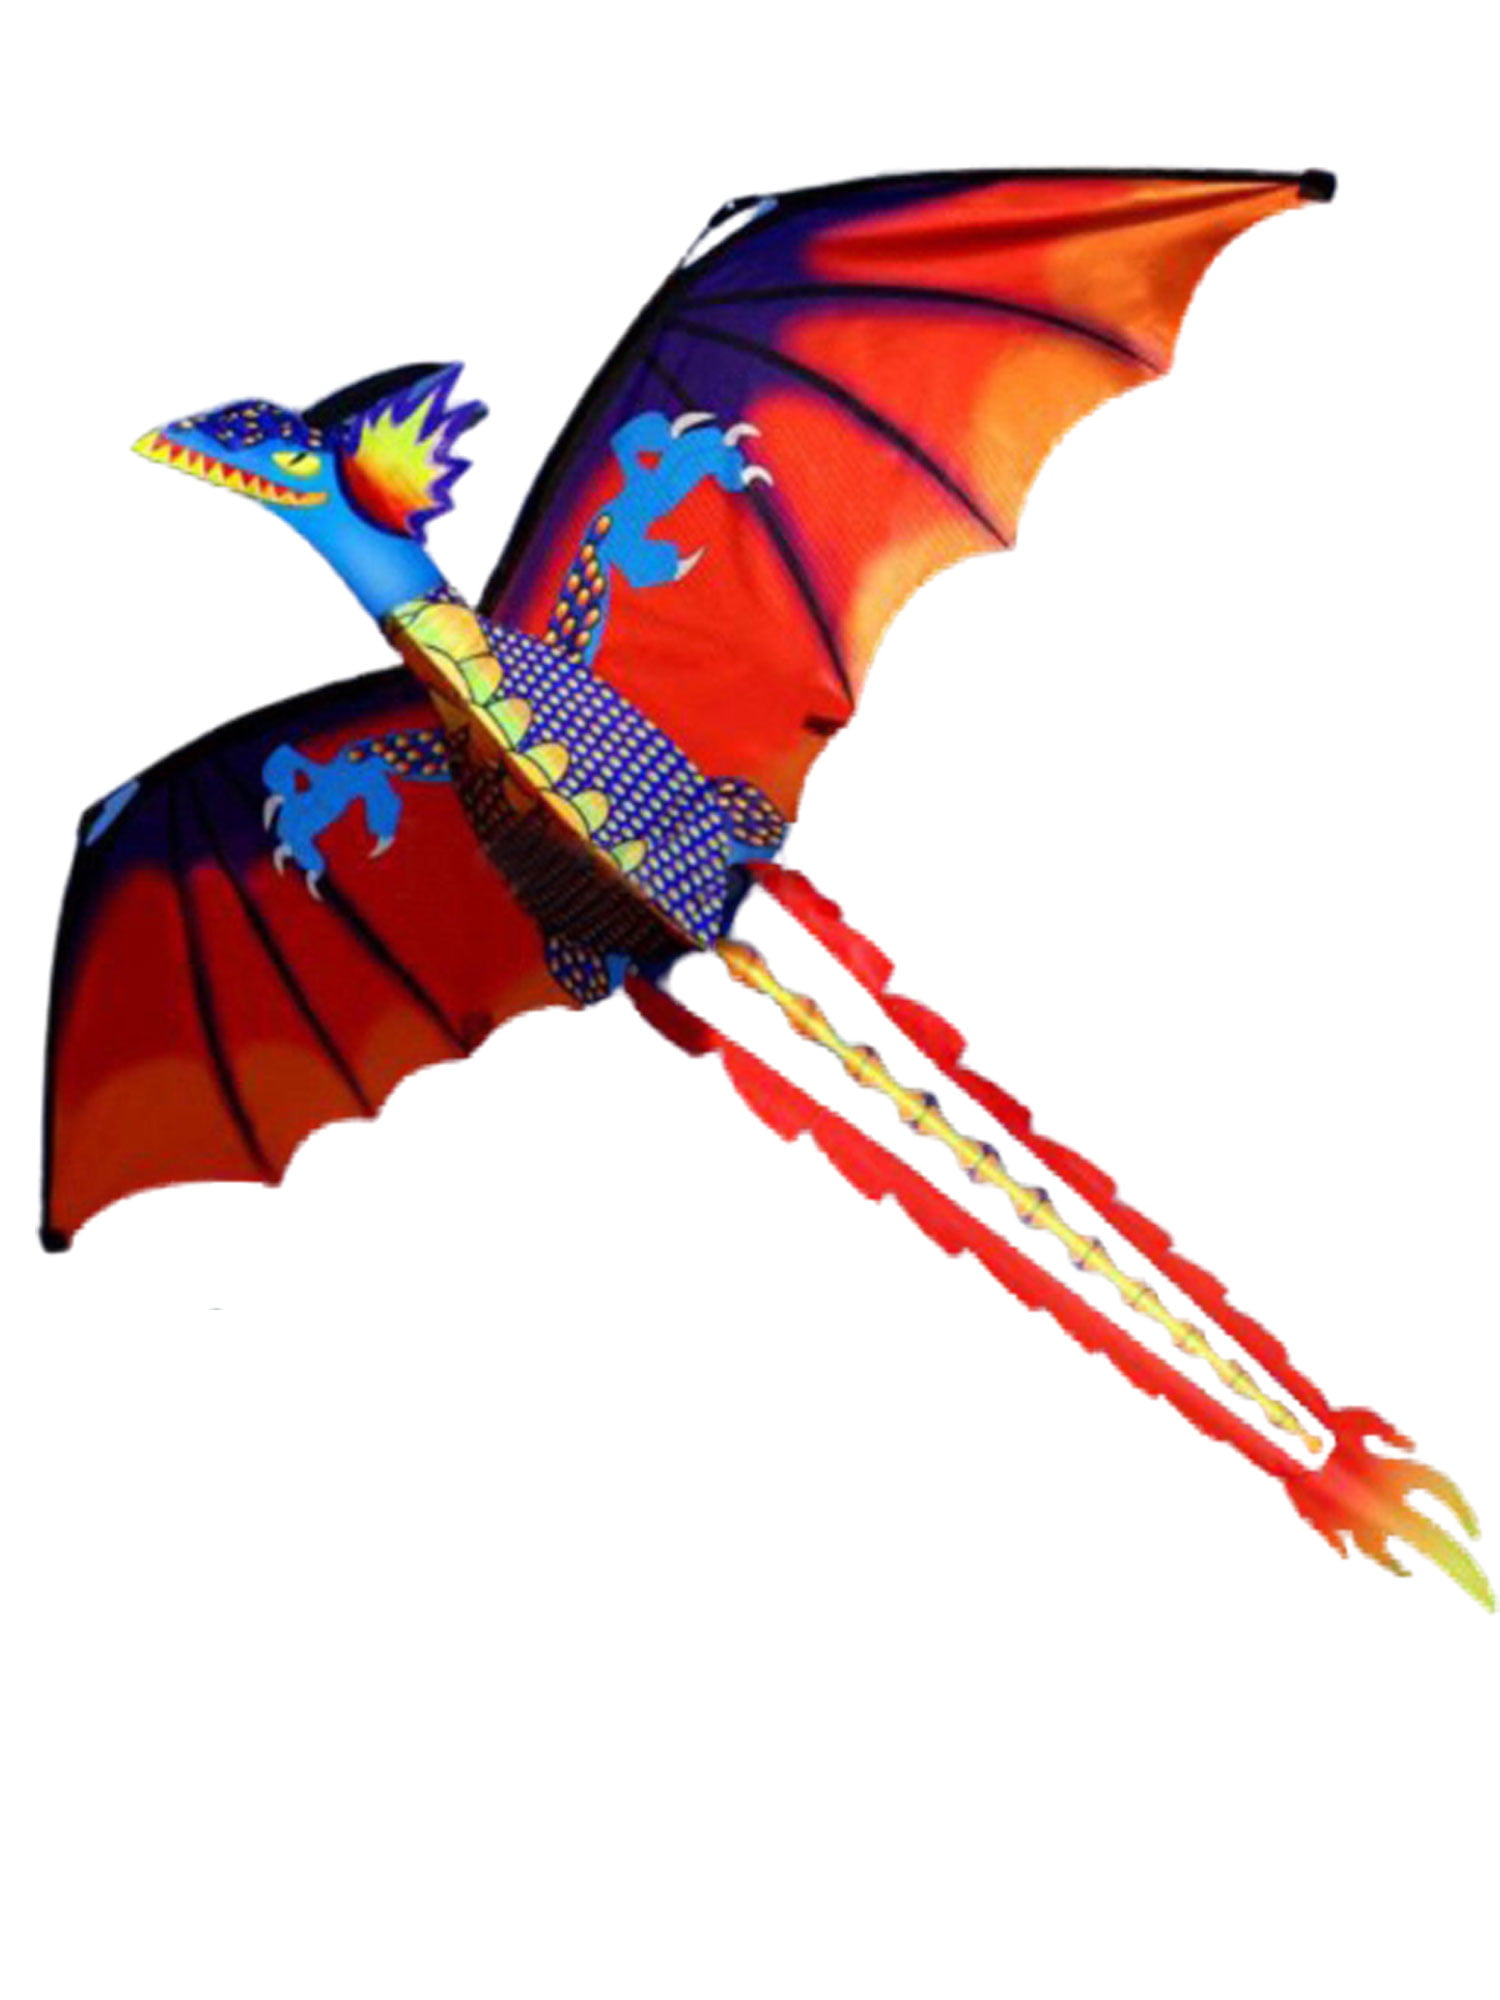 3D Dragon Kite Single Line With Tail Family Outdoor Sports Toy Children Kids NEW 